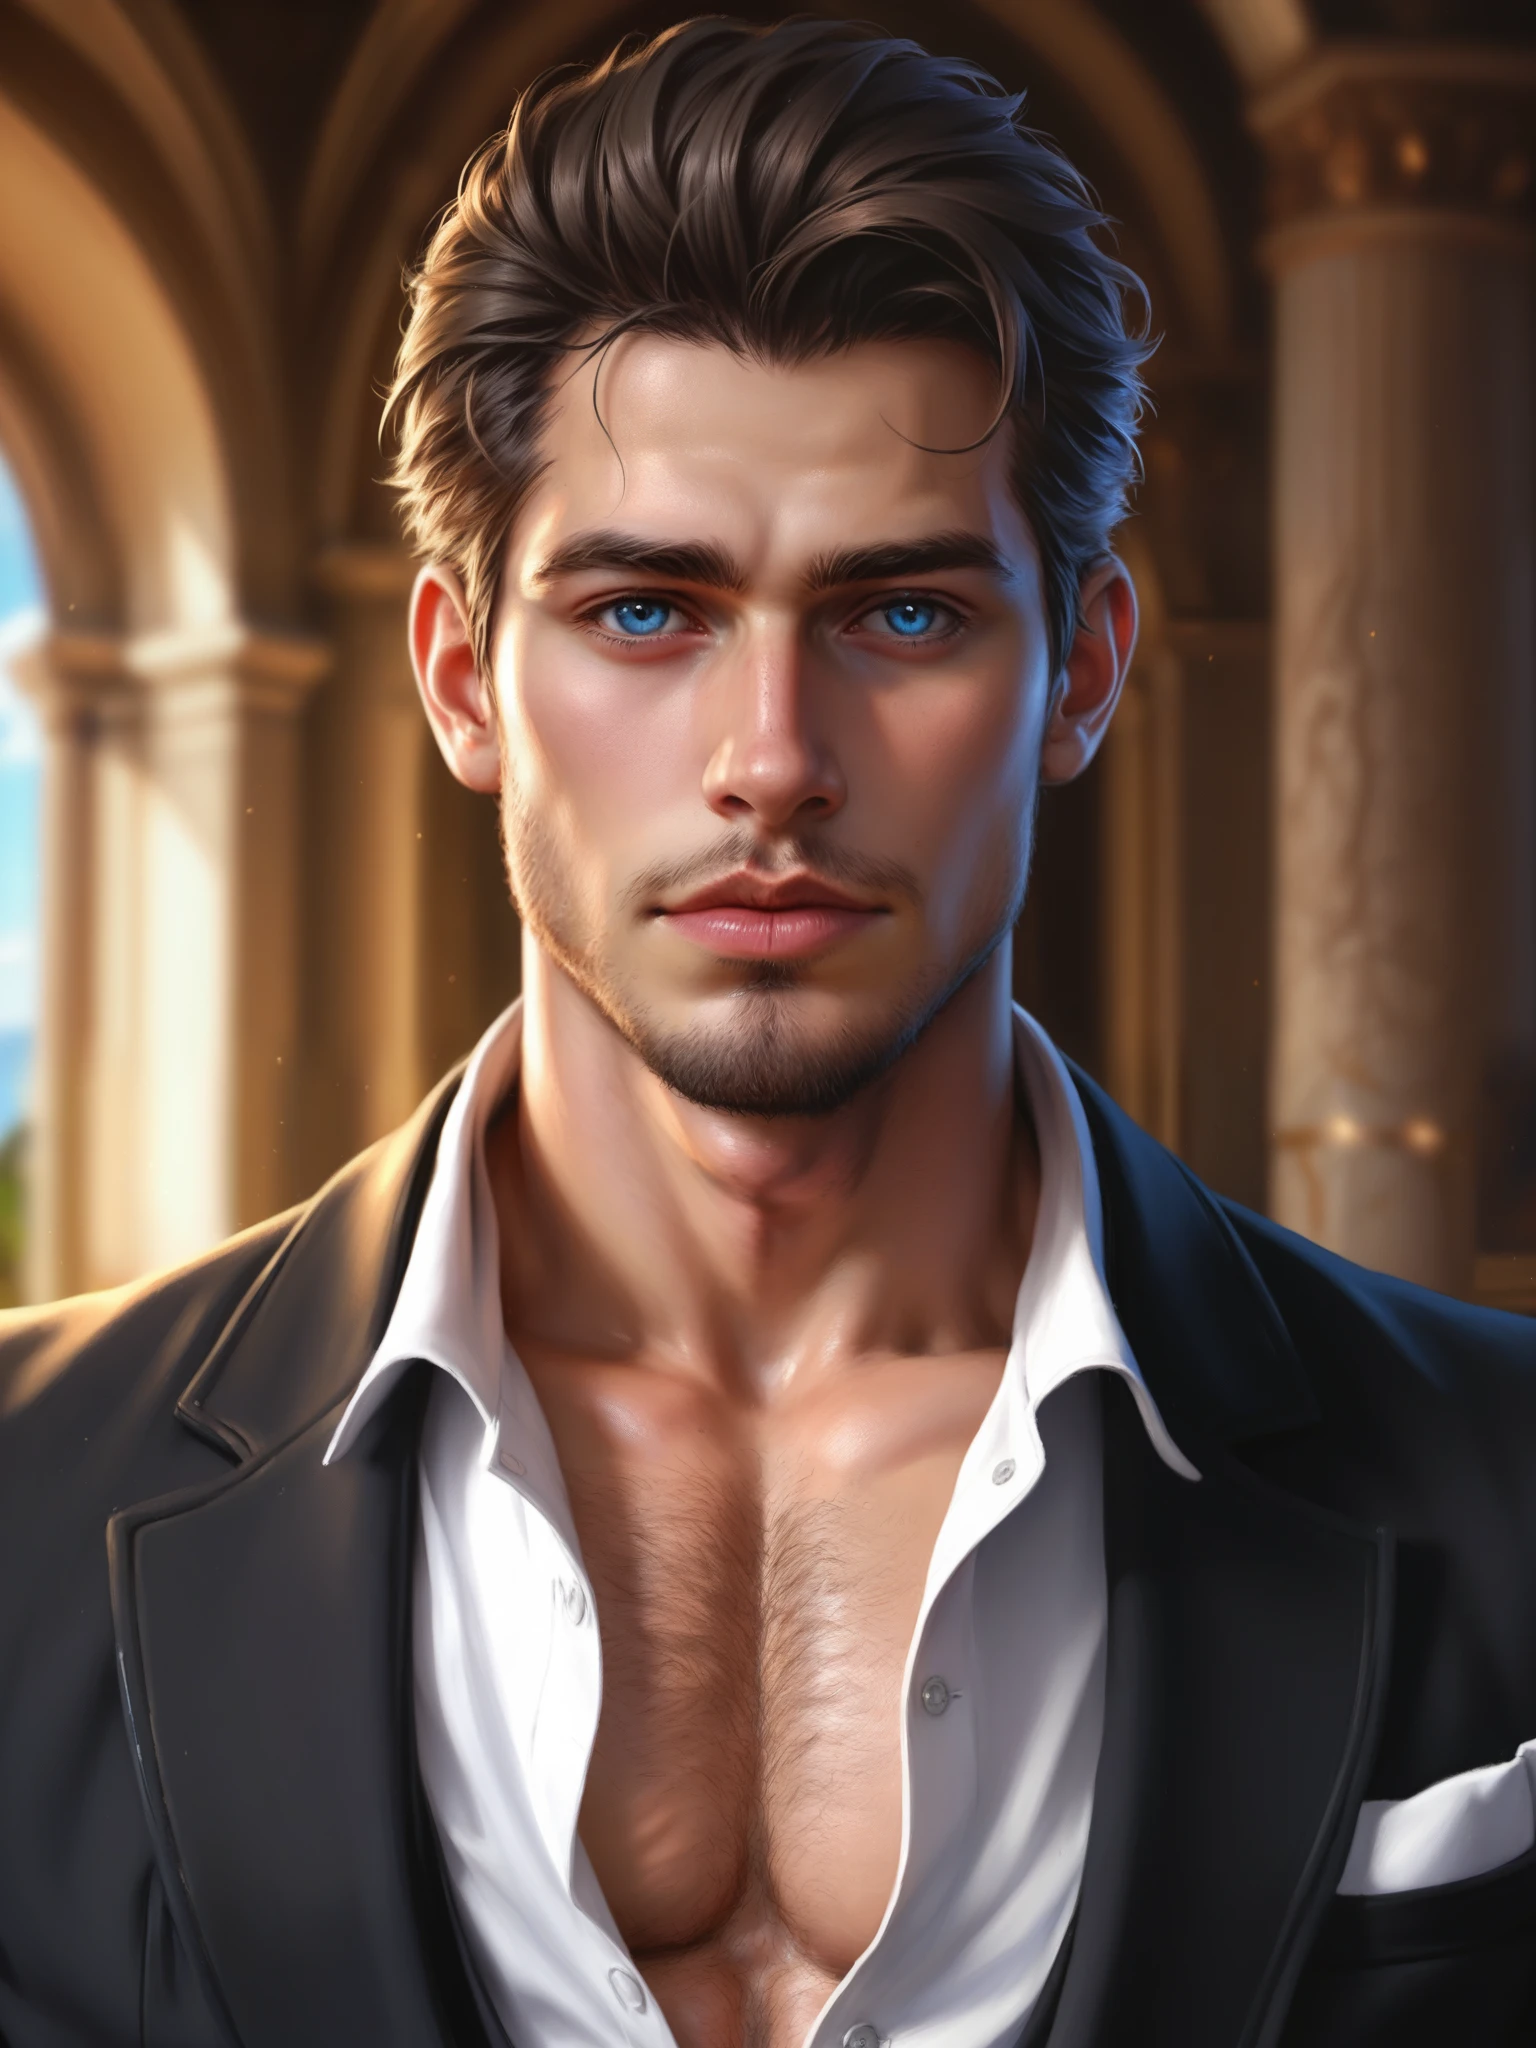 score_9, score_8_up, realistic, A handsome man, chest showing, body hair, Artwork, best quality, high resolution, Close-up portrait, bad, Greek God, fantasy, league of legends style, beautiful figure painting, bright light, Amazing composition, front view , hdr, volumetric lighting, ultra quality, elegant, highly detailed
